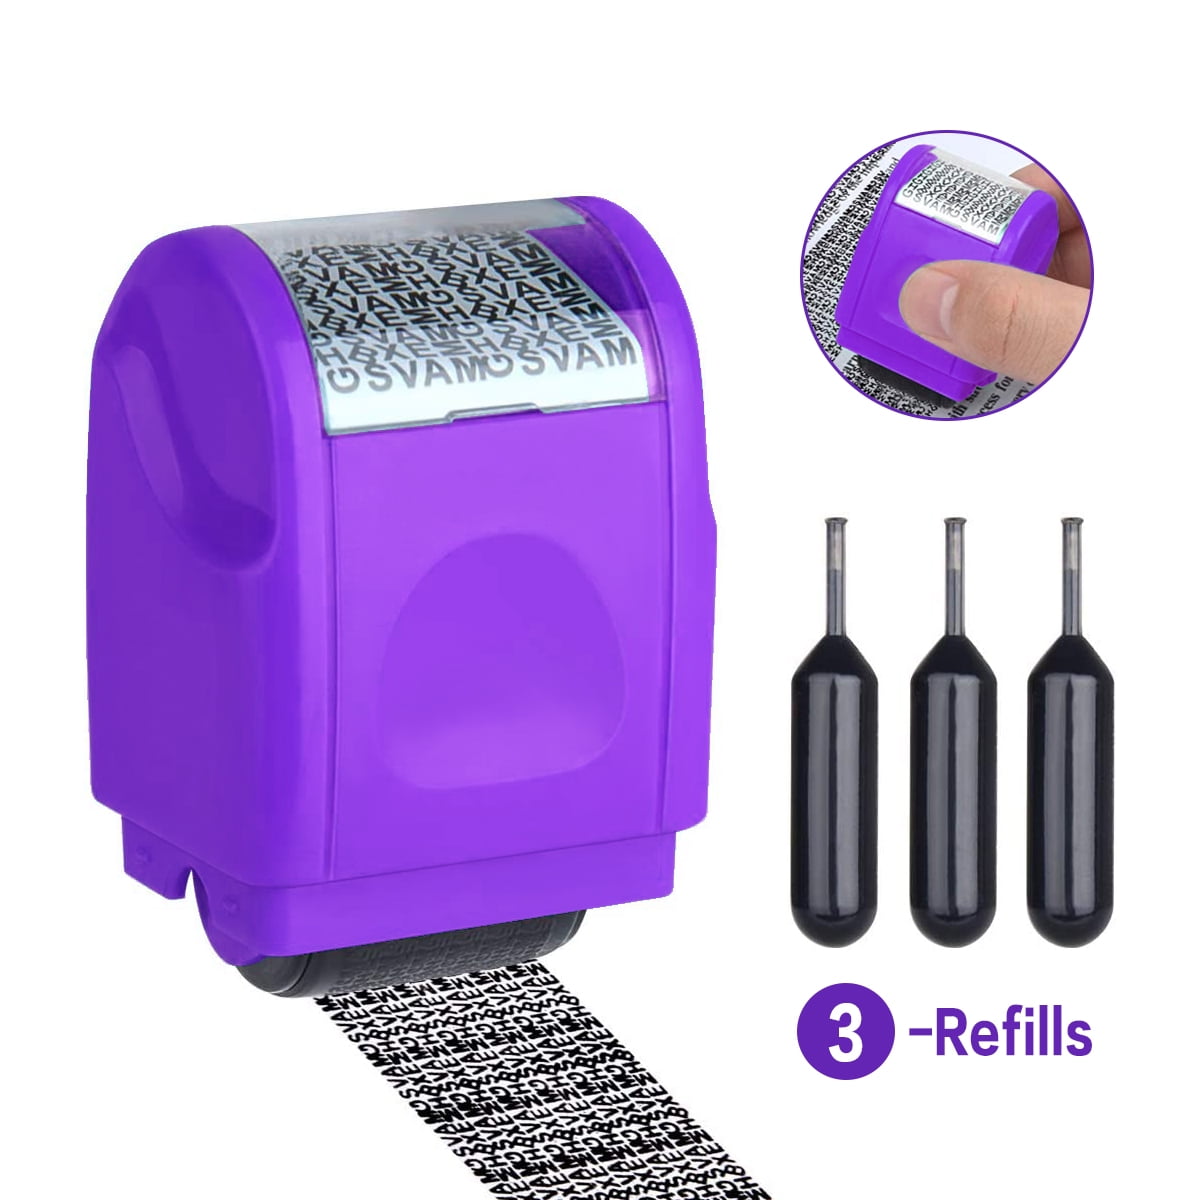 0.67" Wide Identity Protection Roller Stamp &3PCS Refills Theft Prevention Stamp 